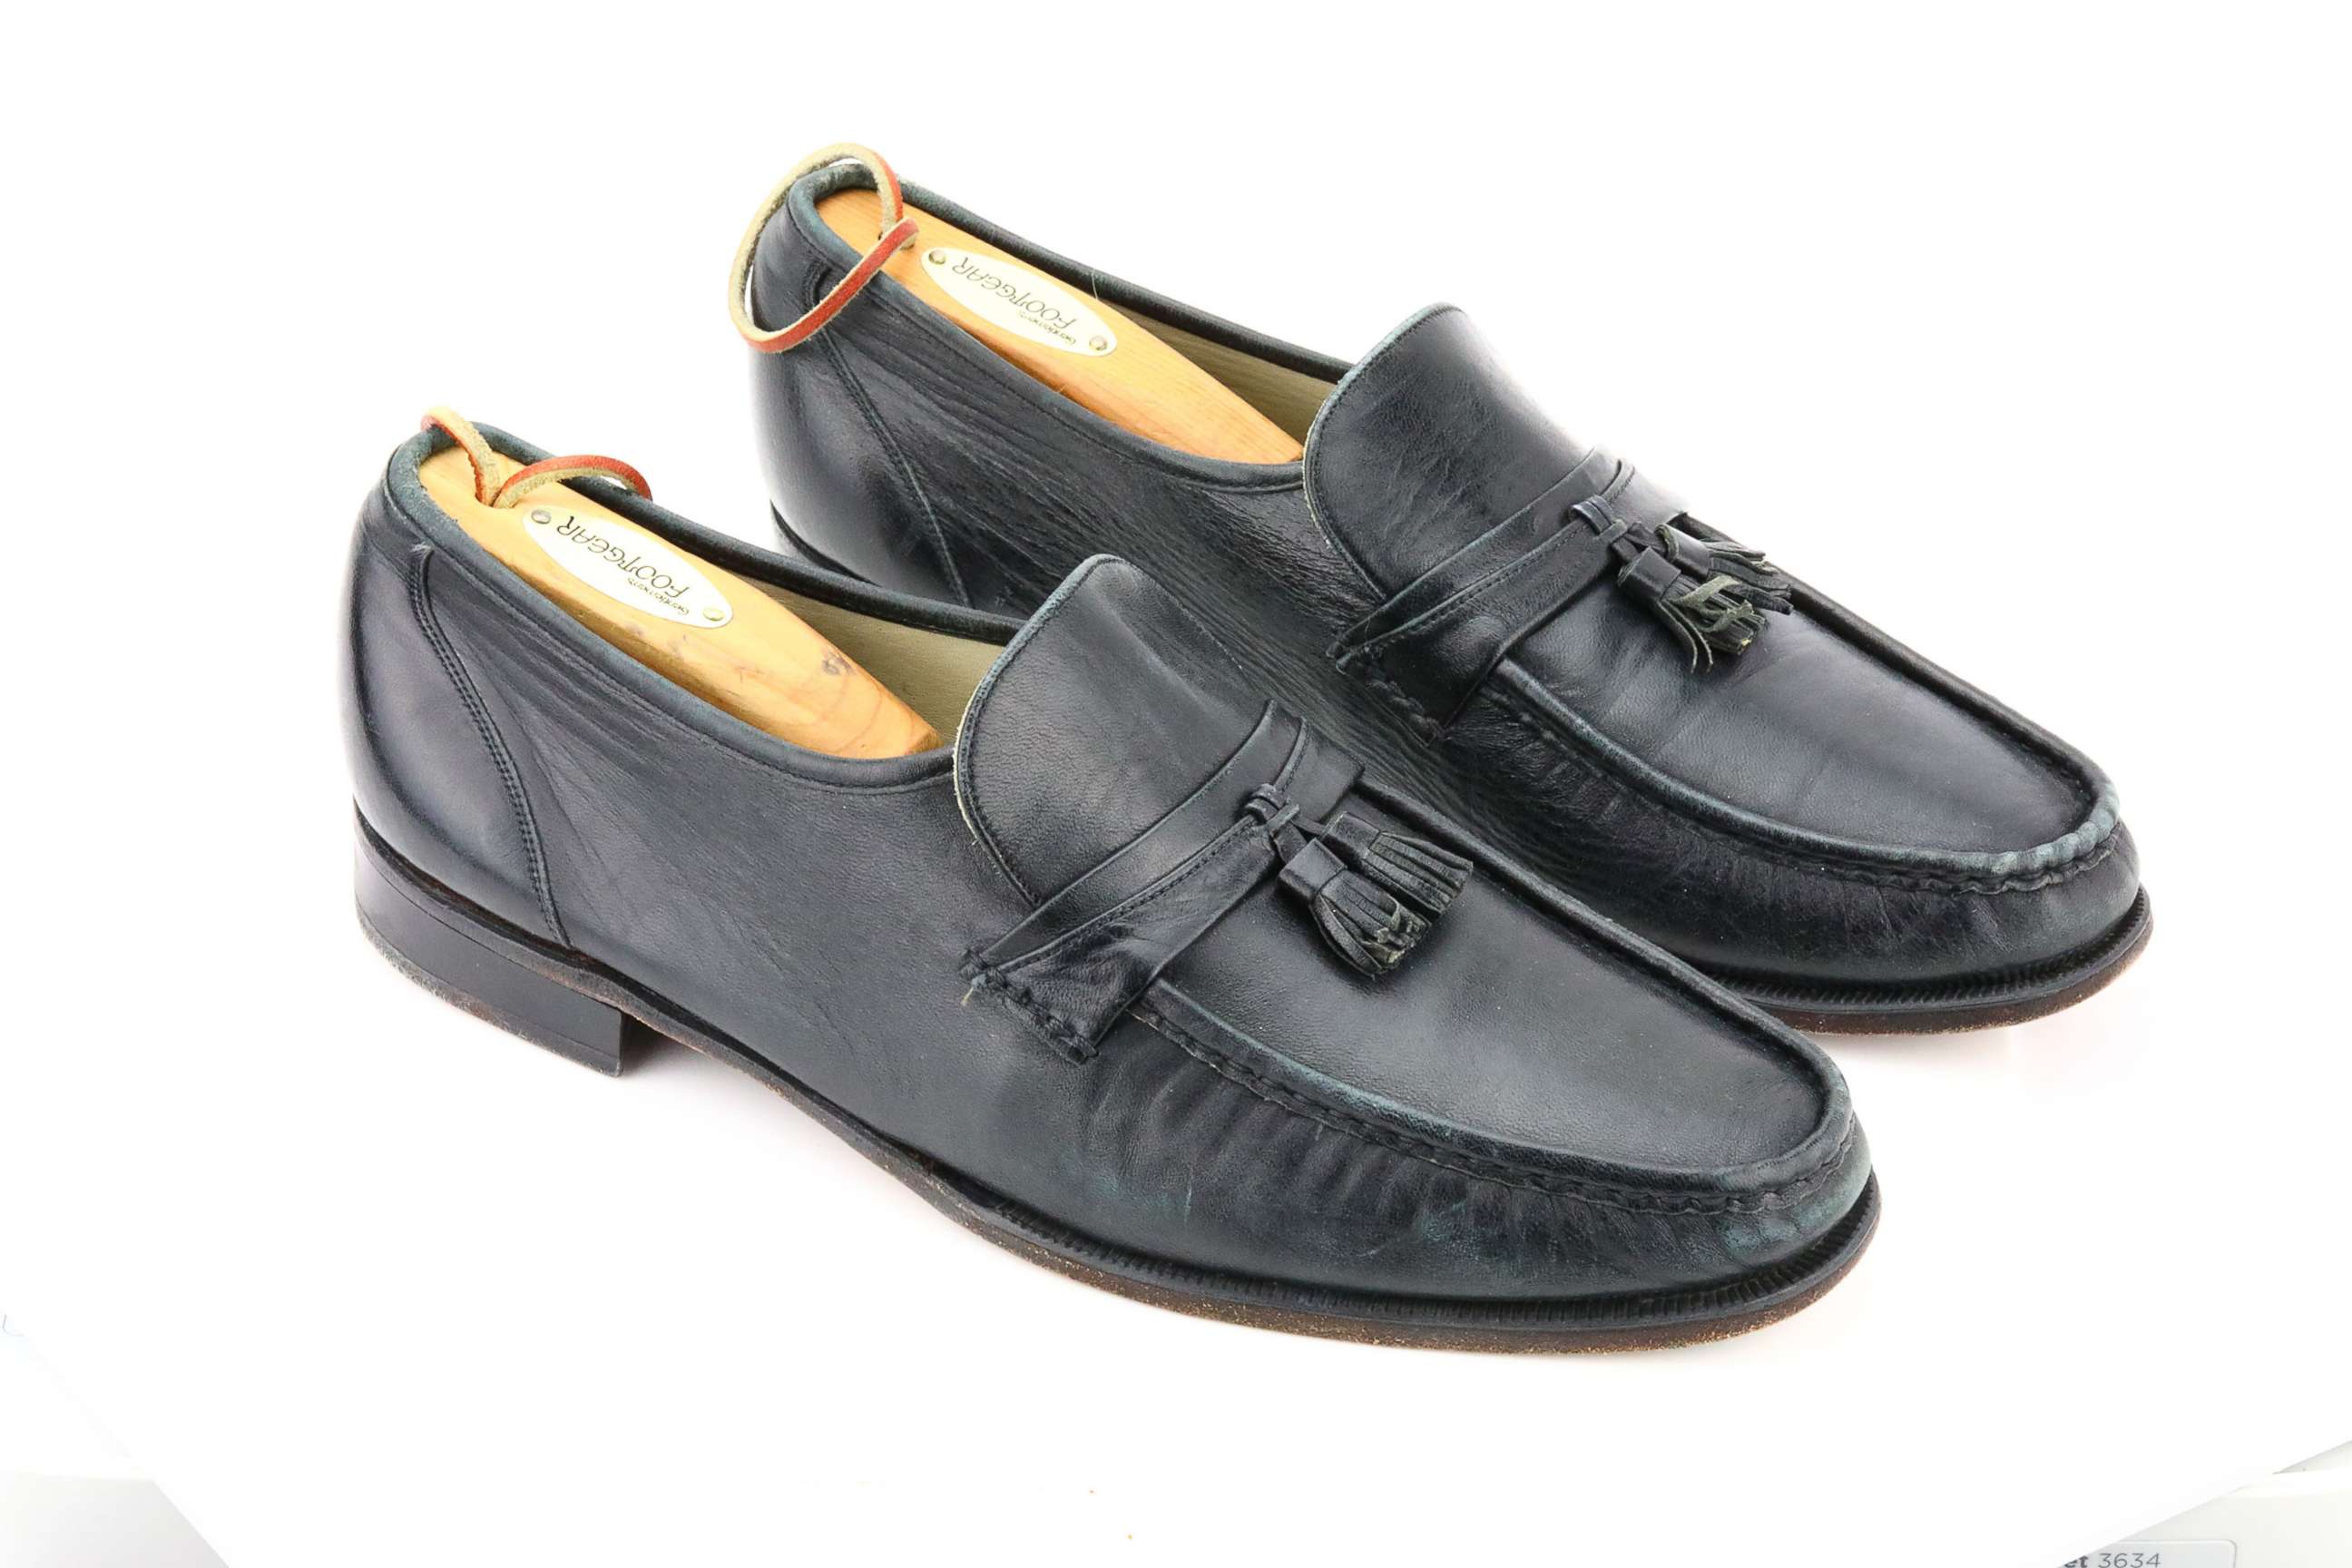 PHOTO: Michael Jackson's black loafers that he wore when performing the moonwalk onstage for the first time will be auctioned off by GWS Auctions.